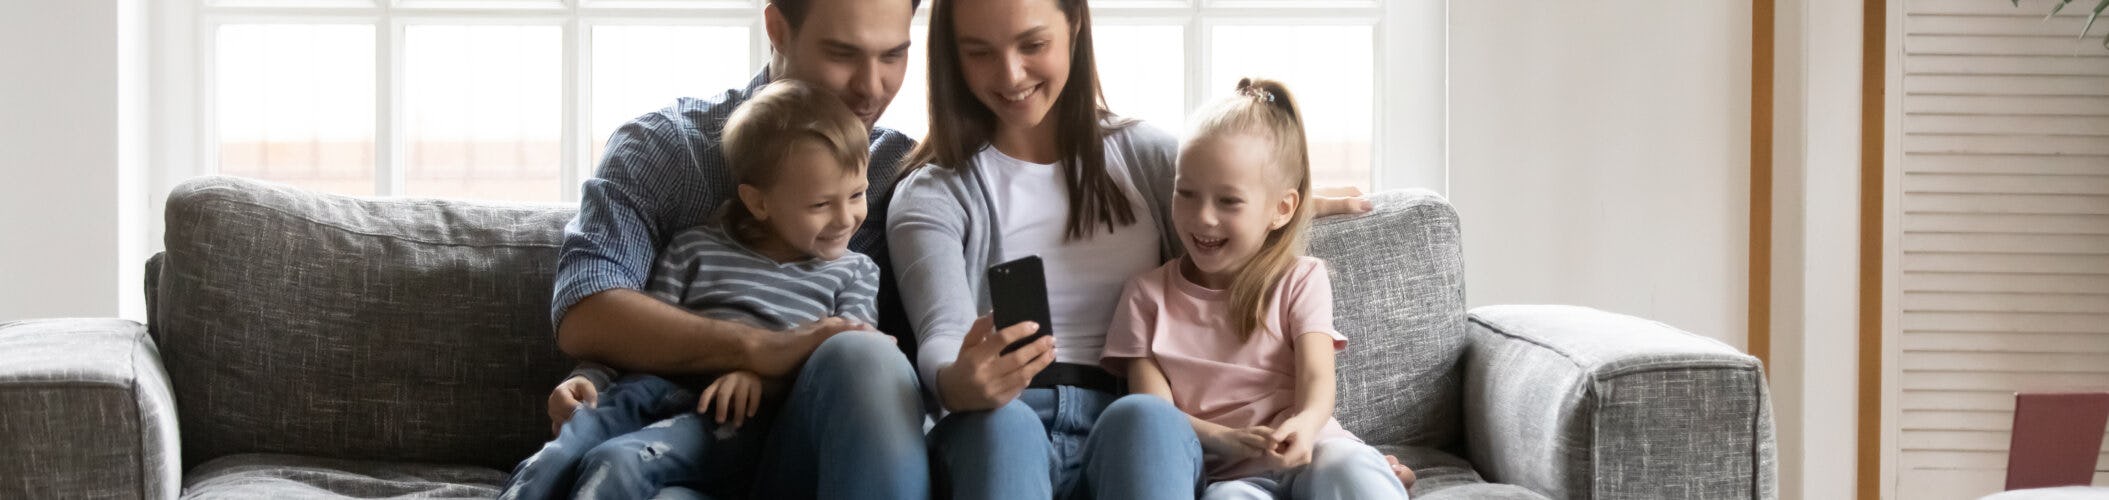 A man, woman and young children sit on a sofa looking at a mobile phone